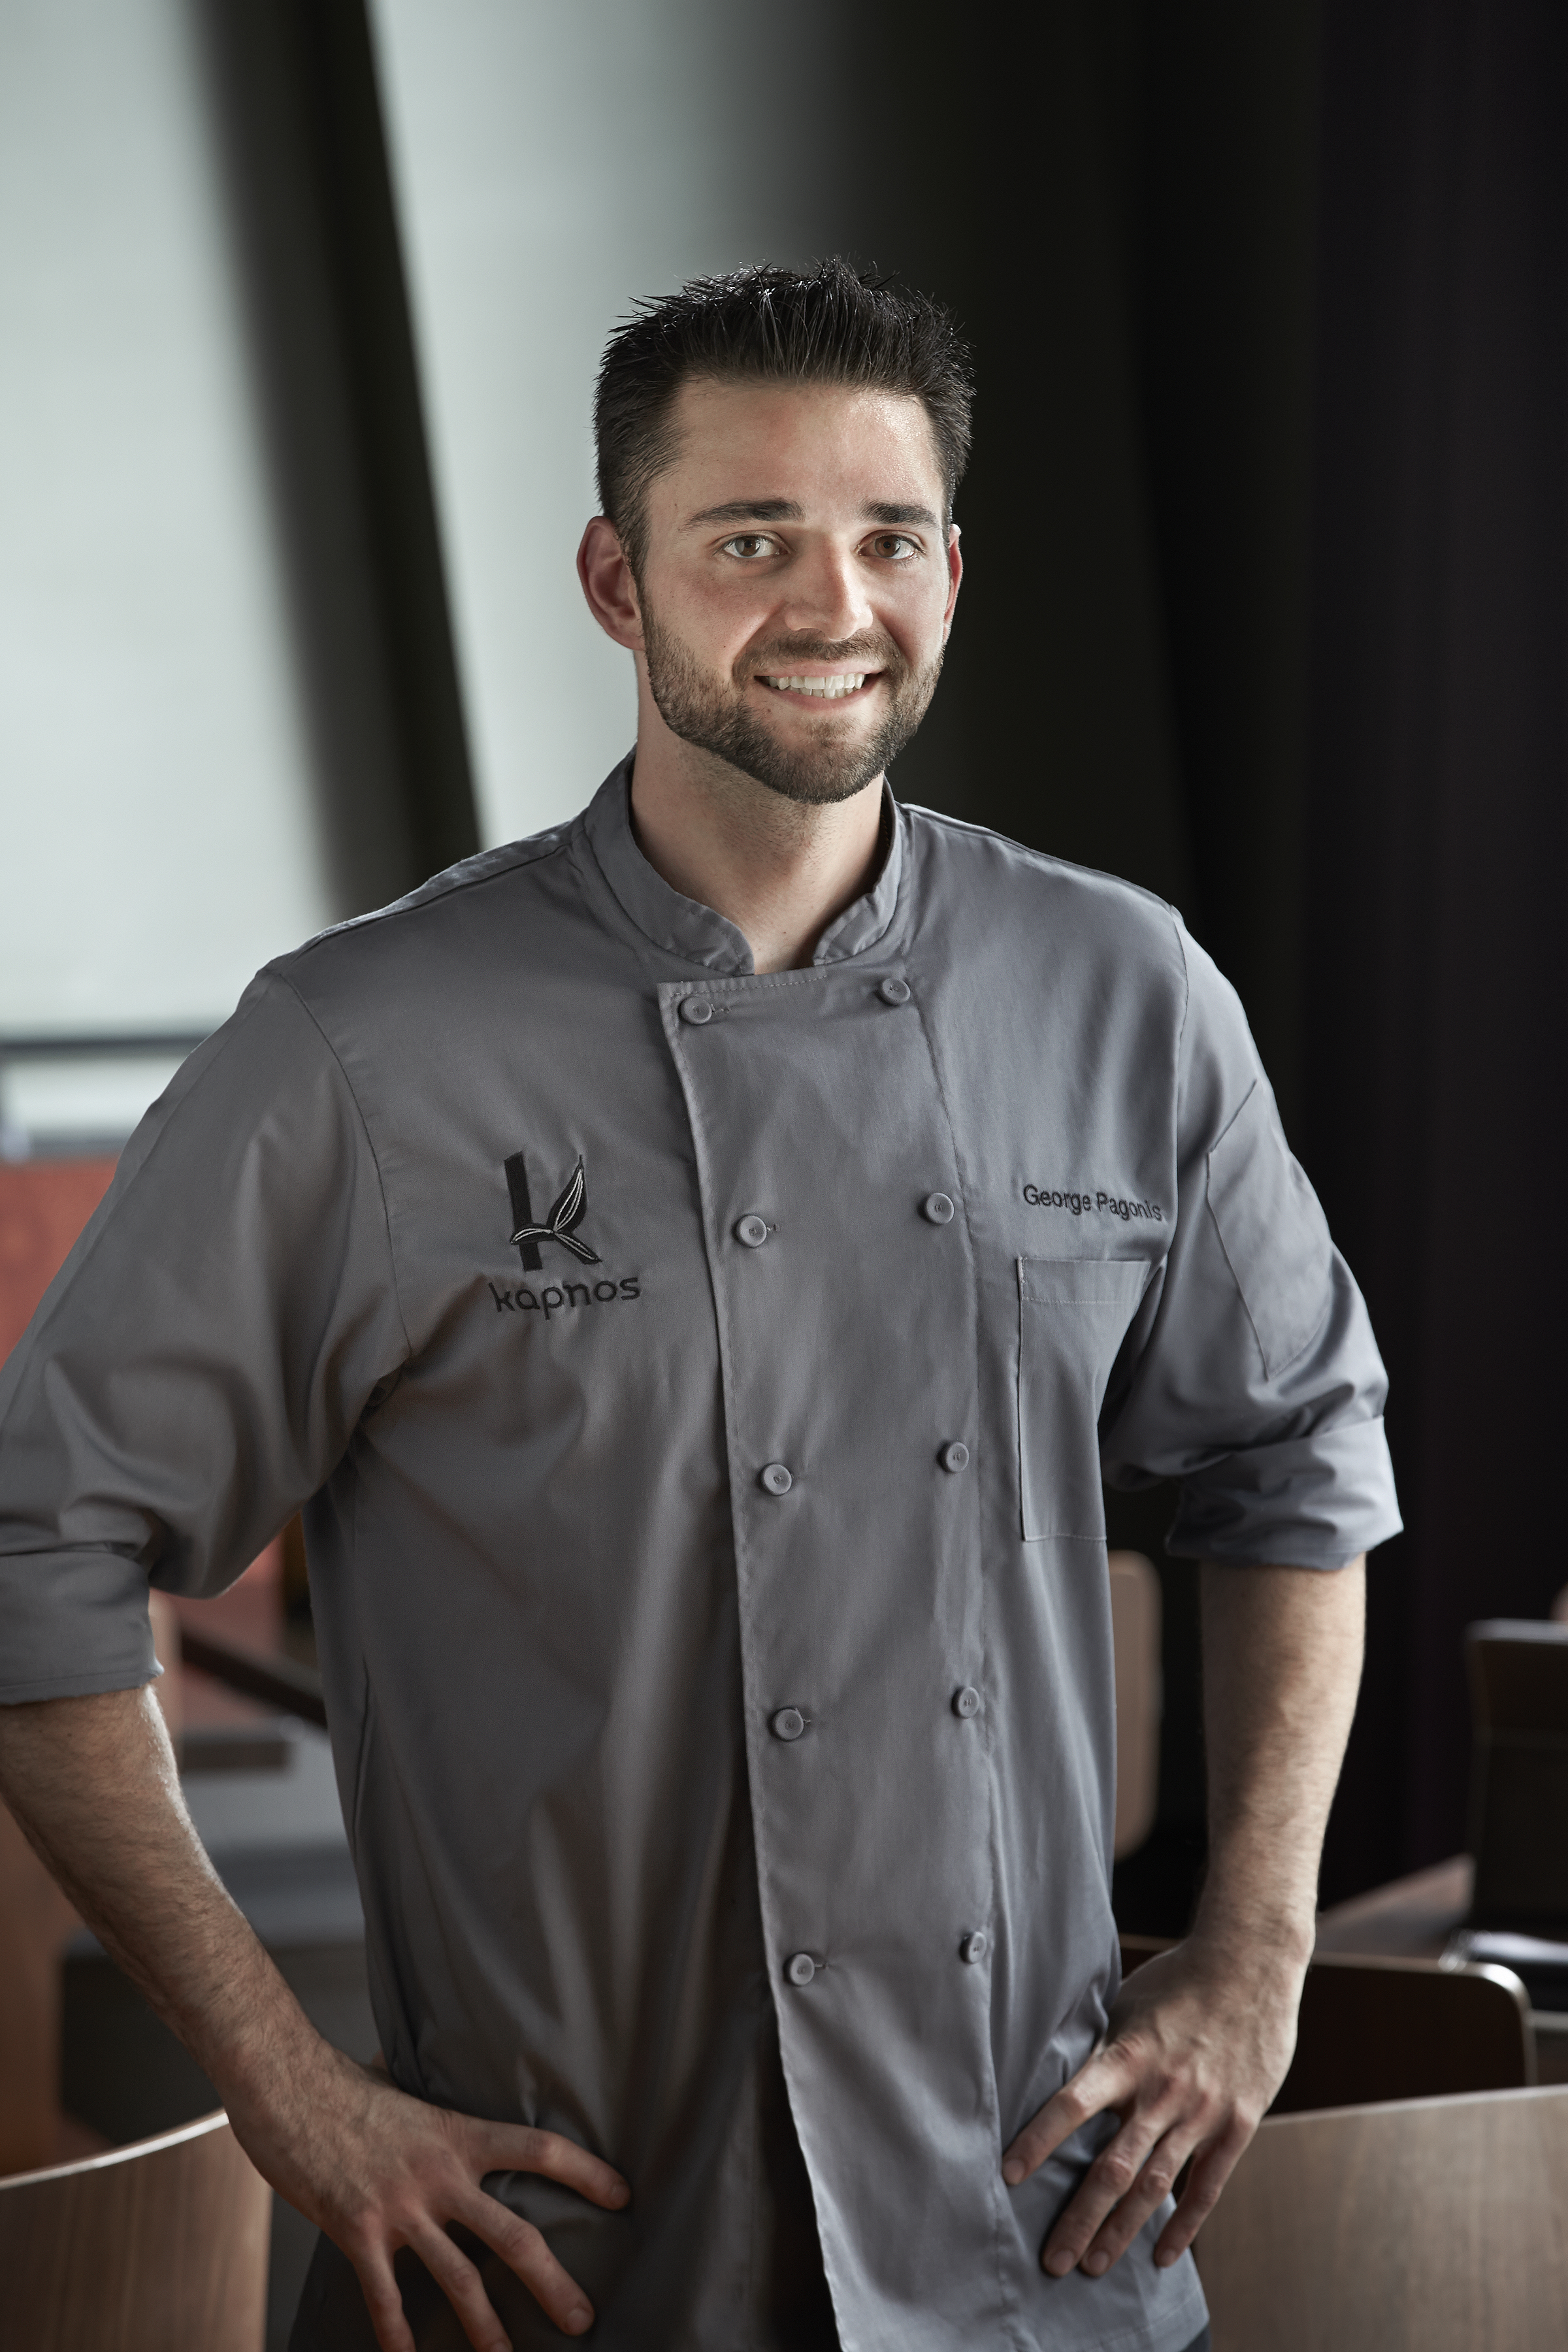 D.C.’s homegrown chef to compete on ‘Top Chef’